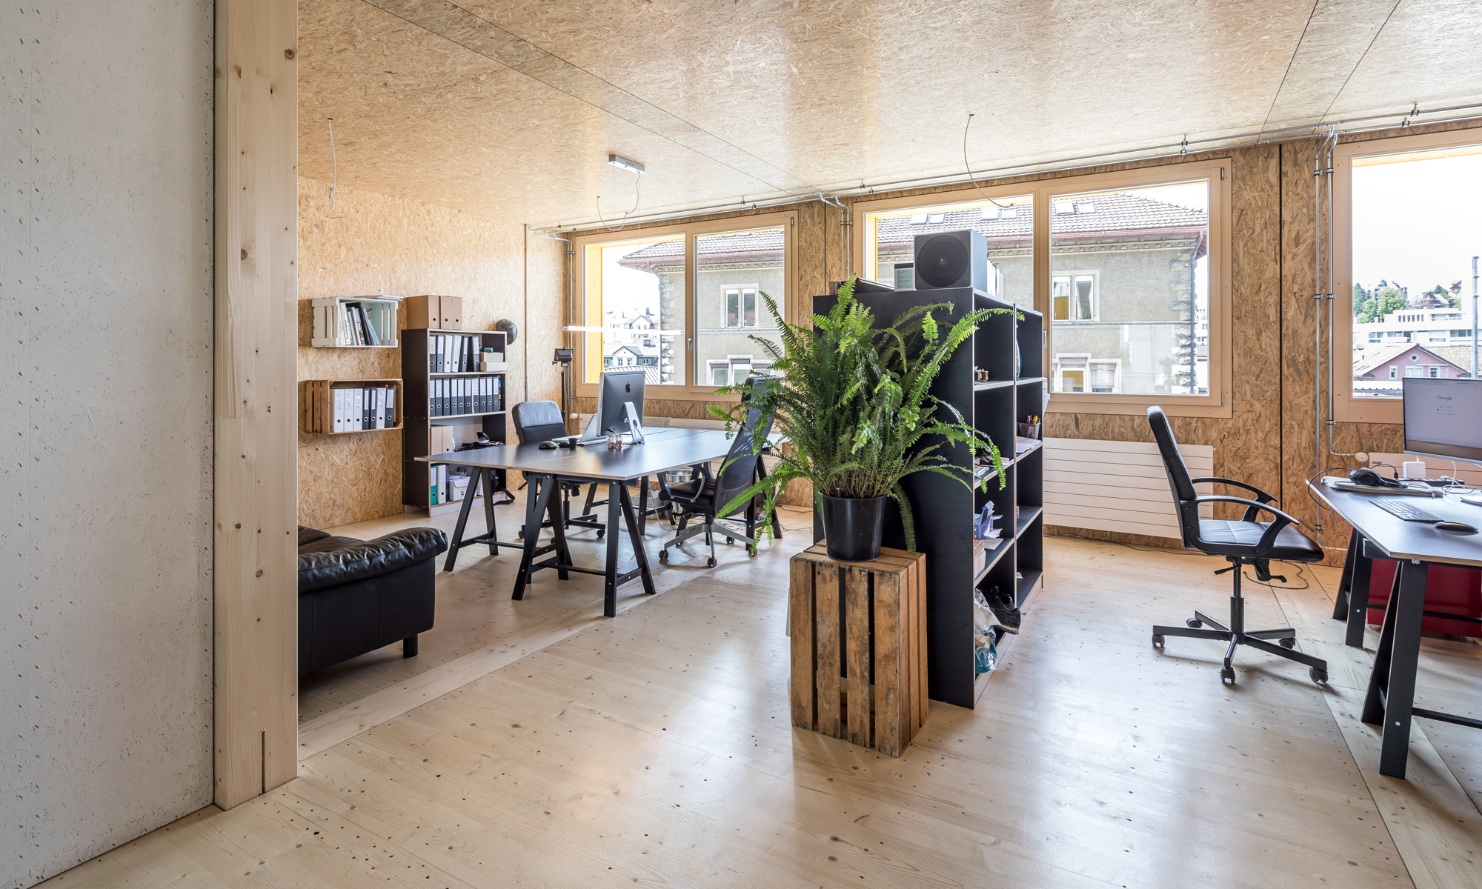 Photograph of an office interior finished entirely in wood with modern furnishing in the Lattich building in St. Gallen